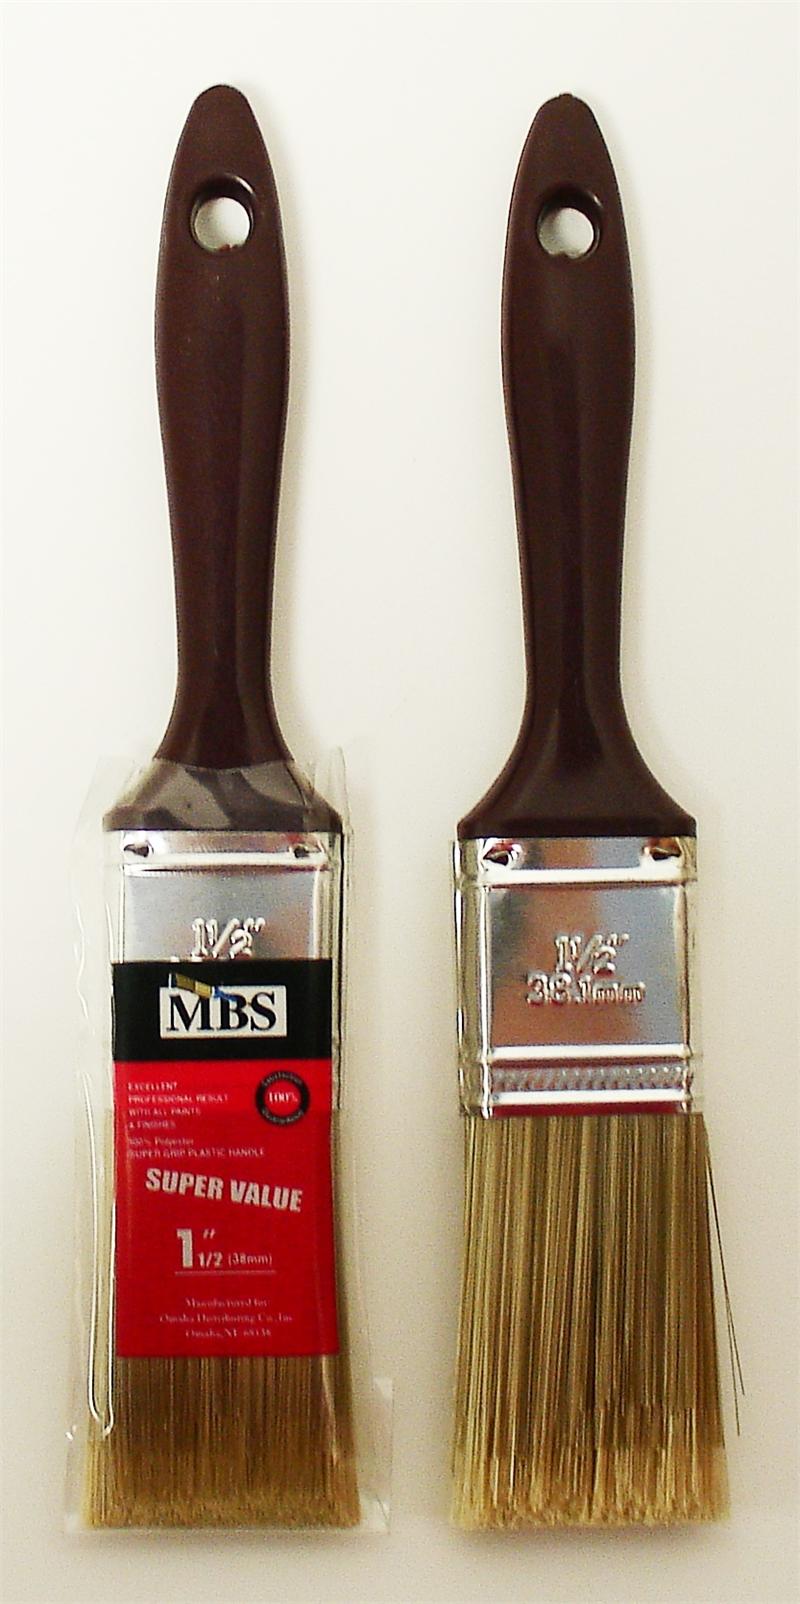 1-1/2 PAINT Brush For All PAINTs -100% POLYESTER-